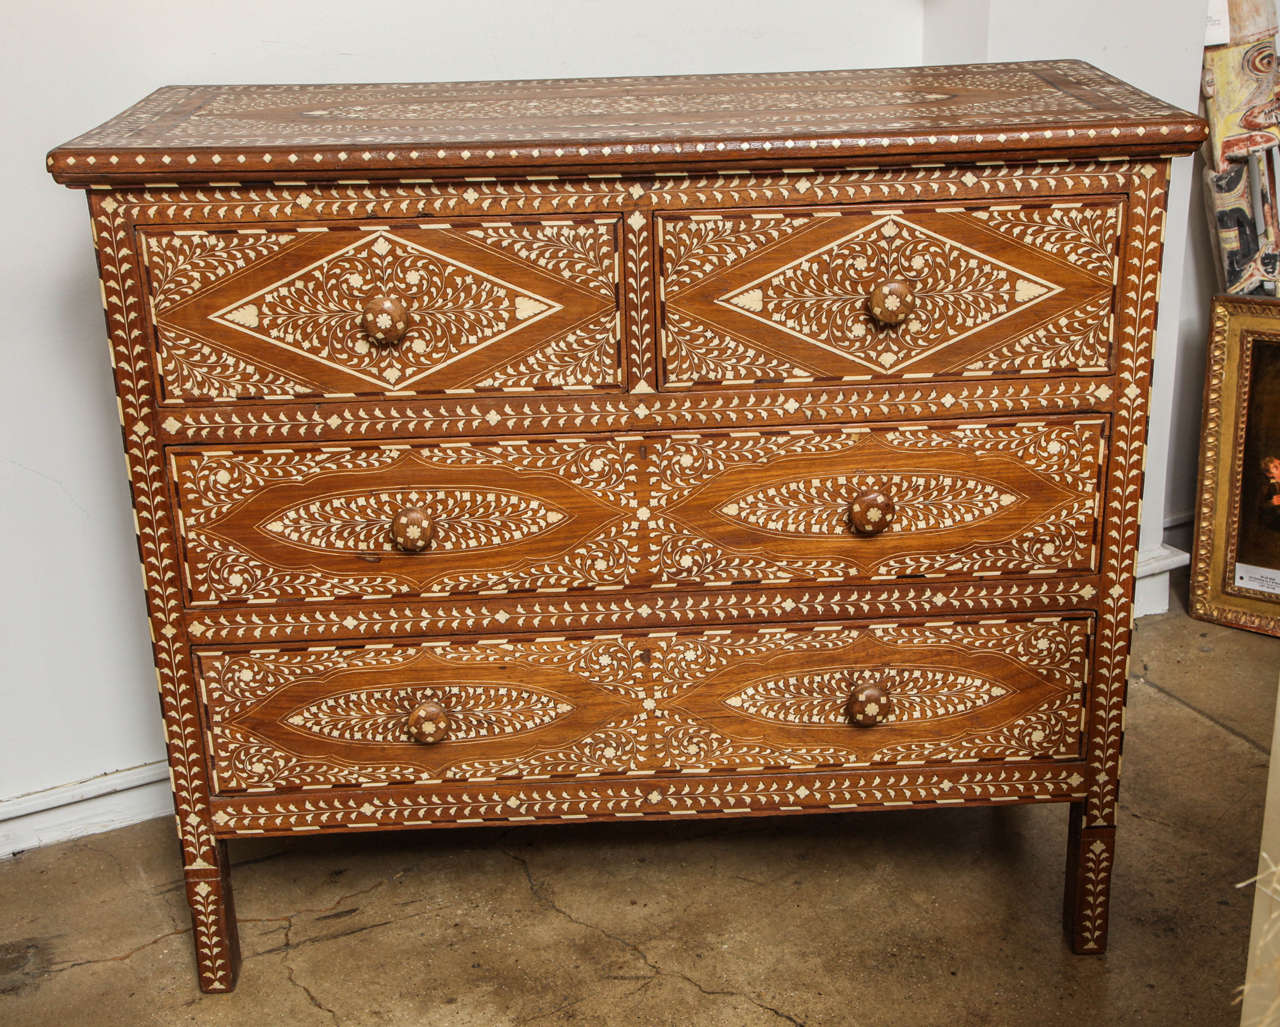 A chest of drawers with bone inlays from India. Five drawers and straight legs. Inlays in Classic Indian pattern.